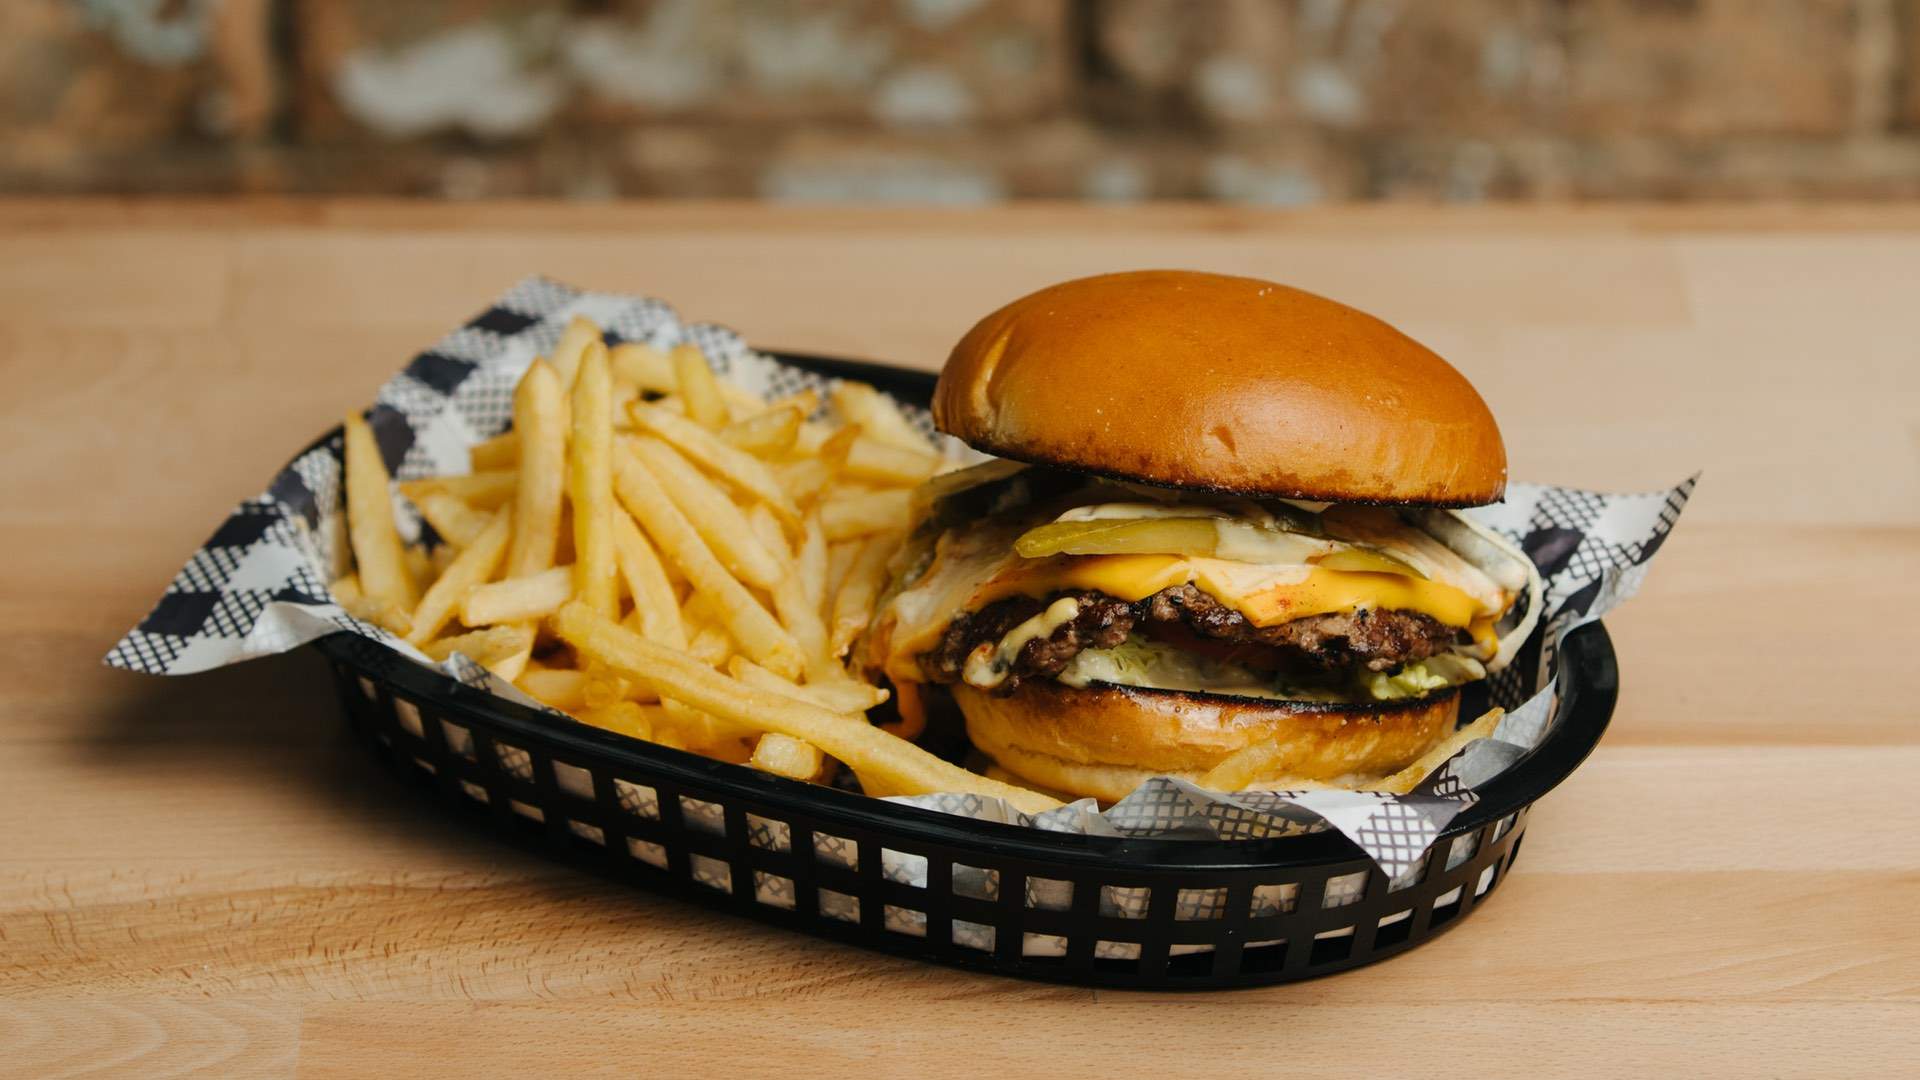 Hip Hop-Loving Ethical Burger Joint 4 Ounces Is Expanding to Leichhardt